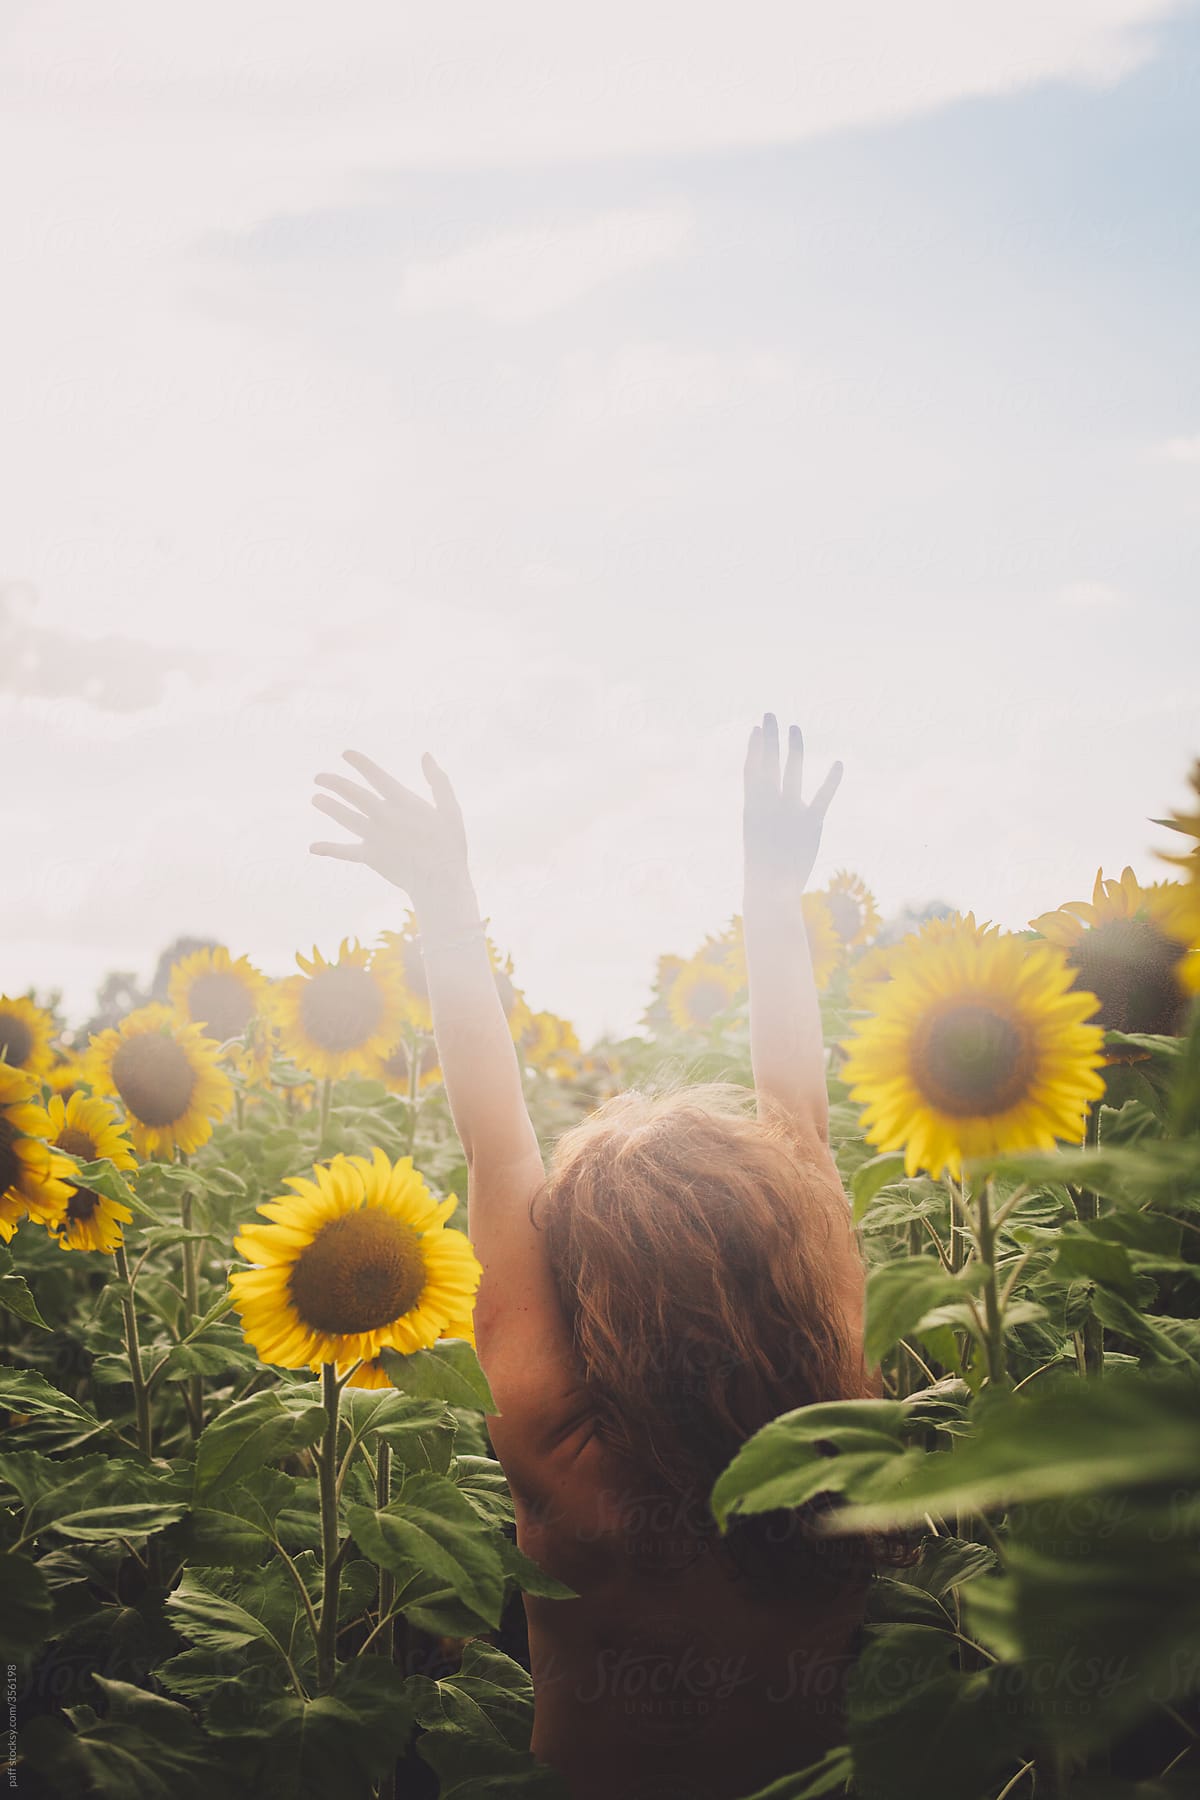 Free-spirited picture of a girl in a sunflower field